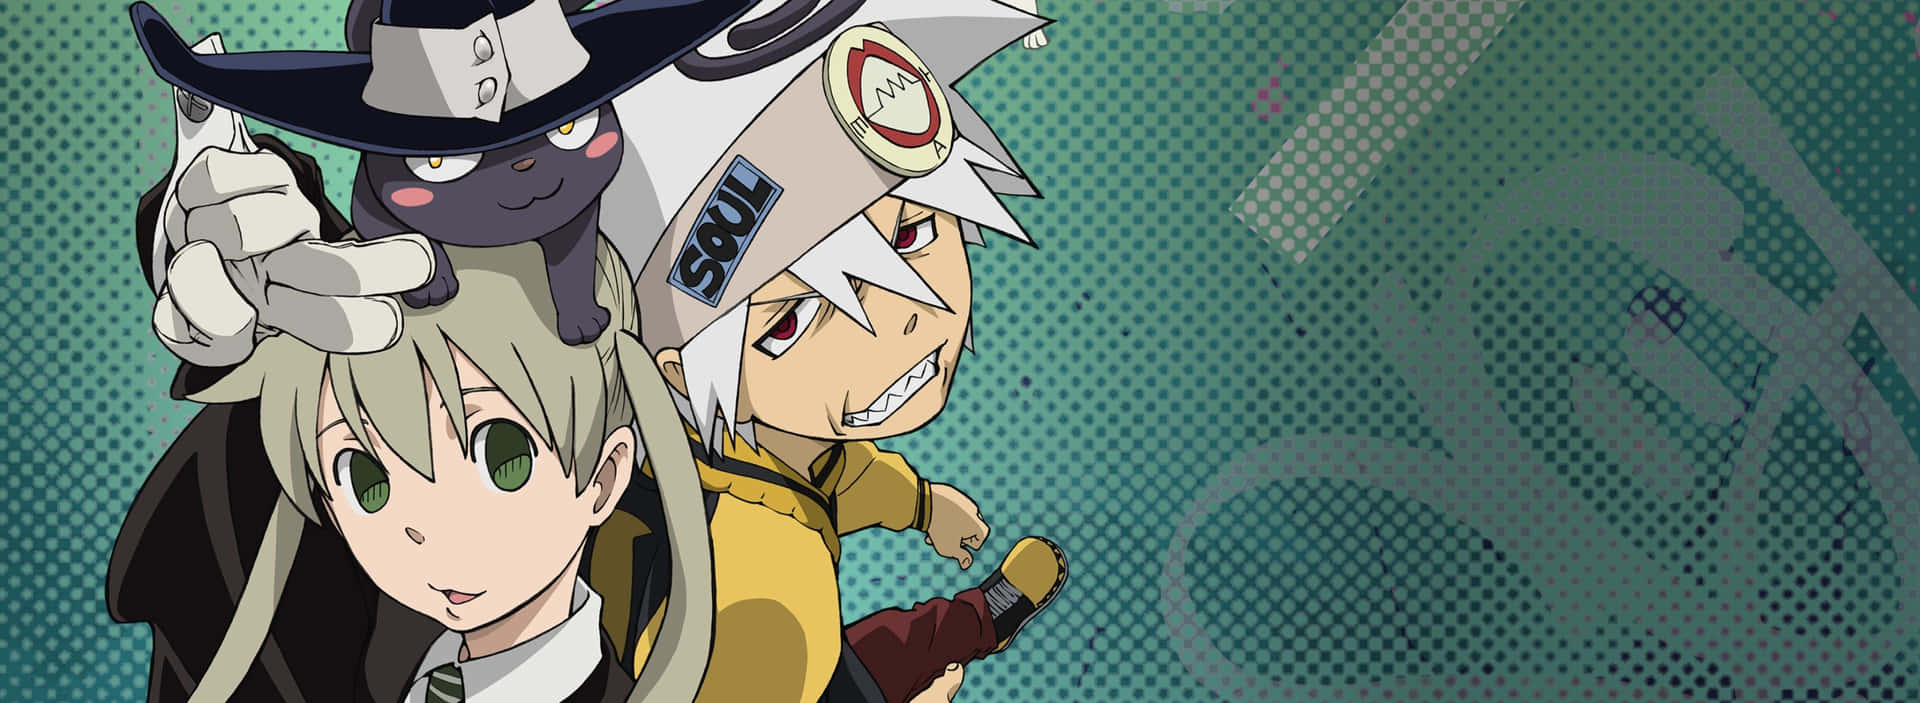 Unlock the power within with Soul Eater Manga Wallpaper